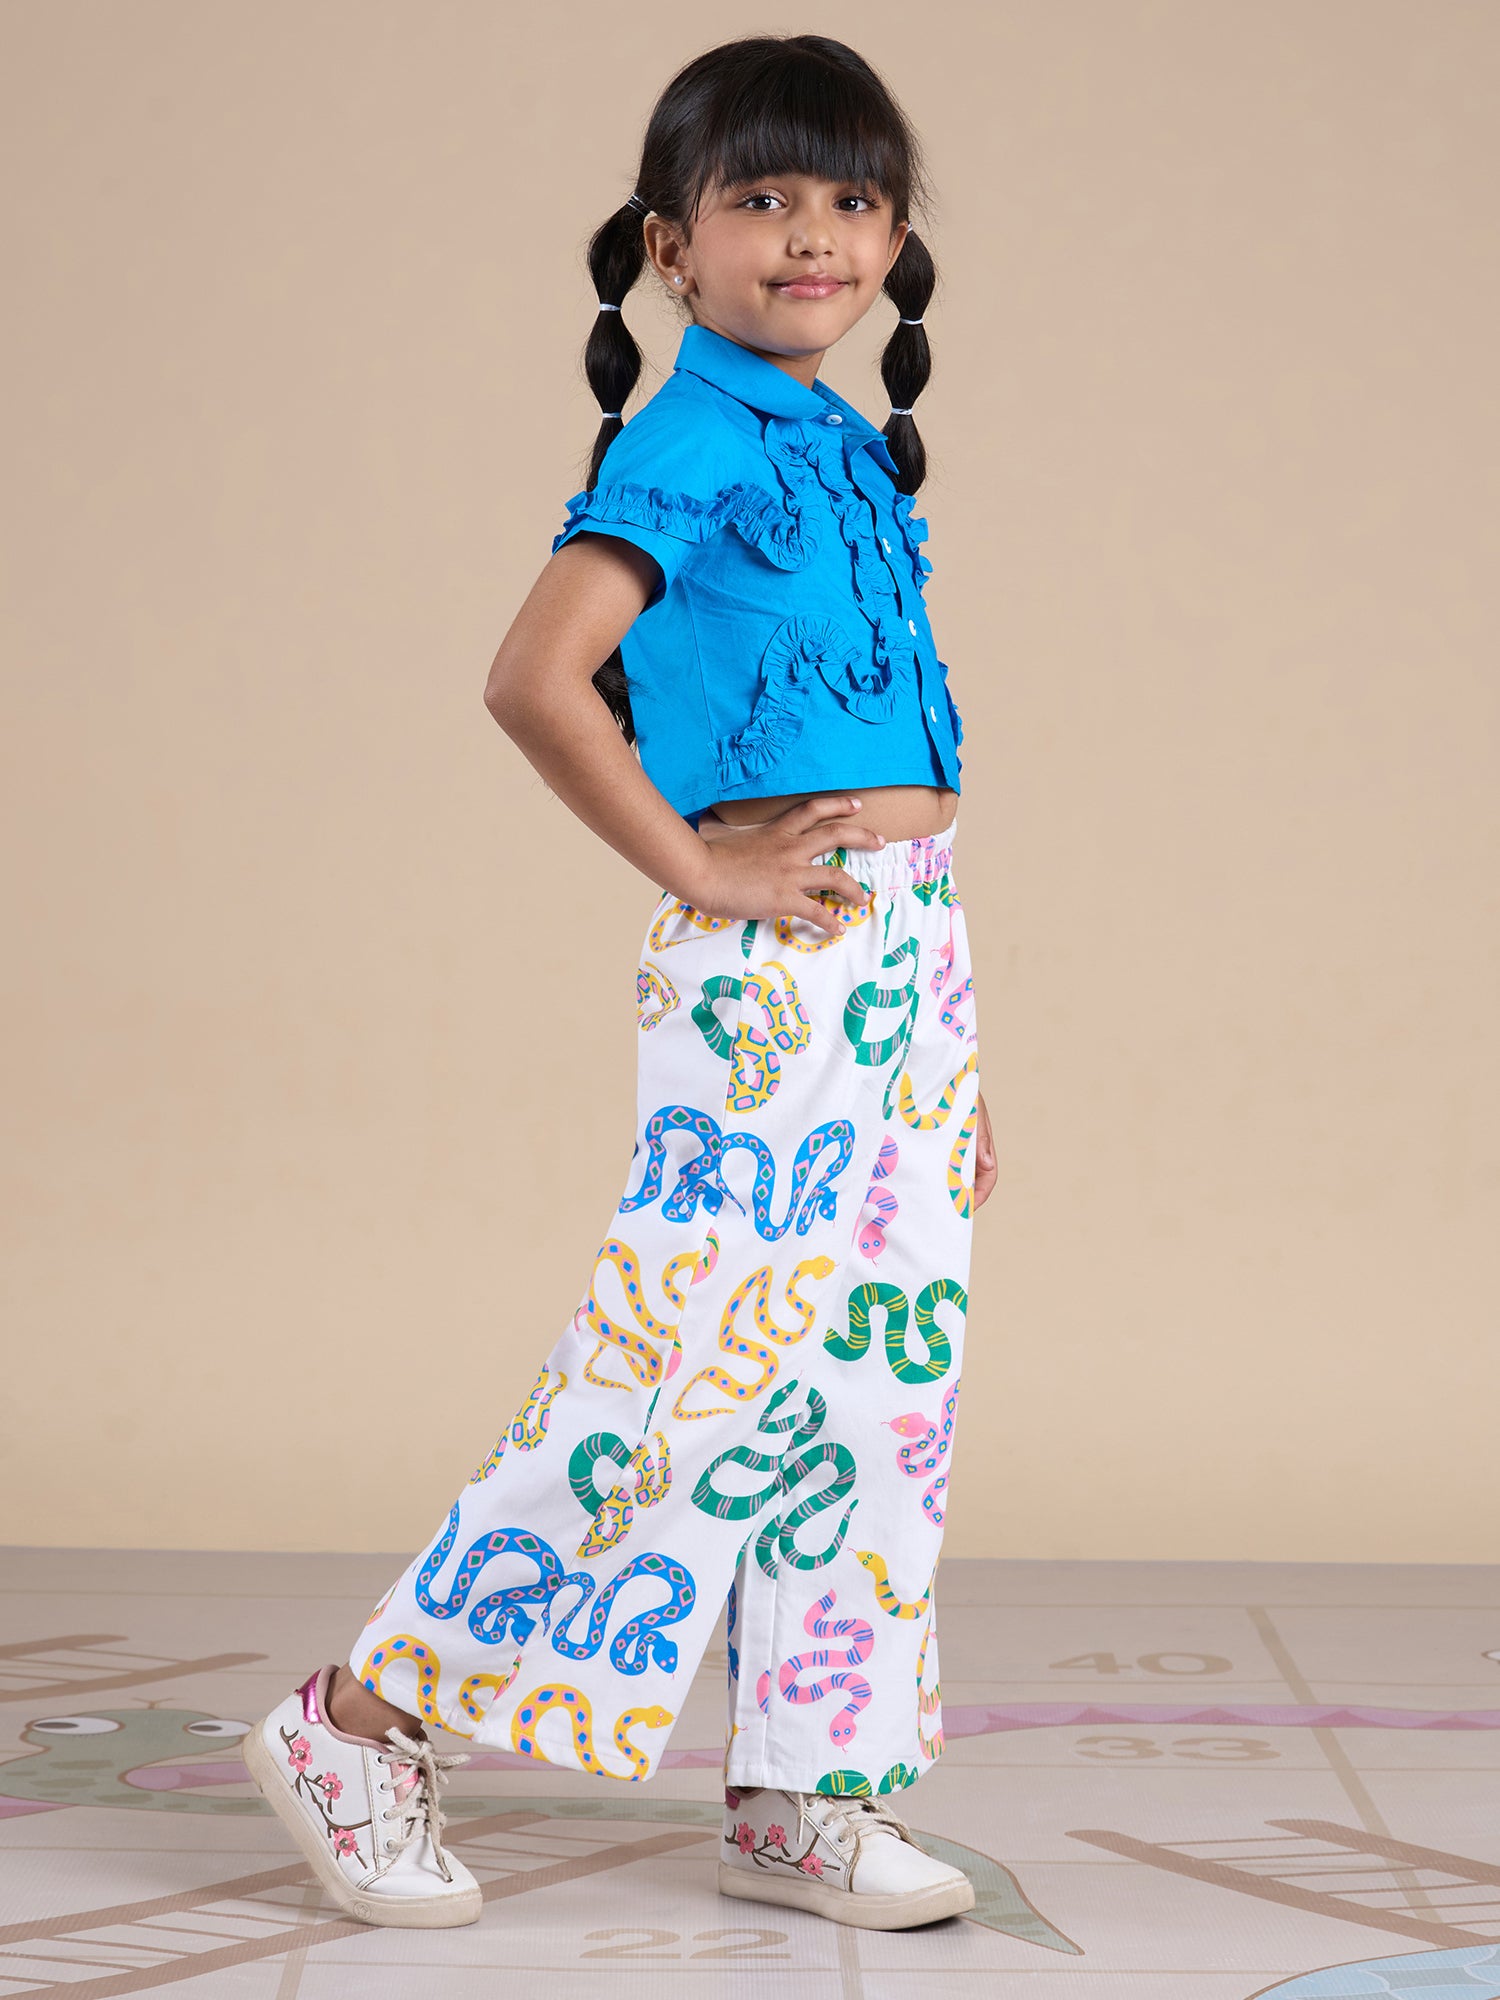 Snakes And Ladders Girls Blue Shirt And Multi Color Snake Print Pant Set From Siblings Collection - Lil Drama